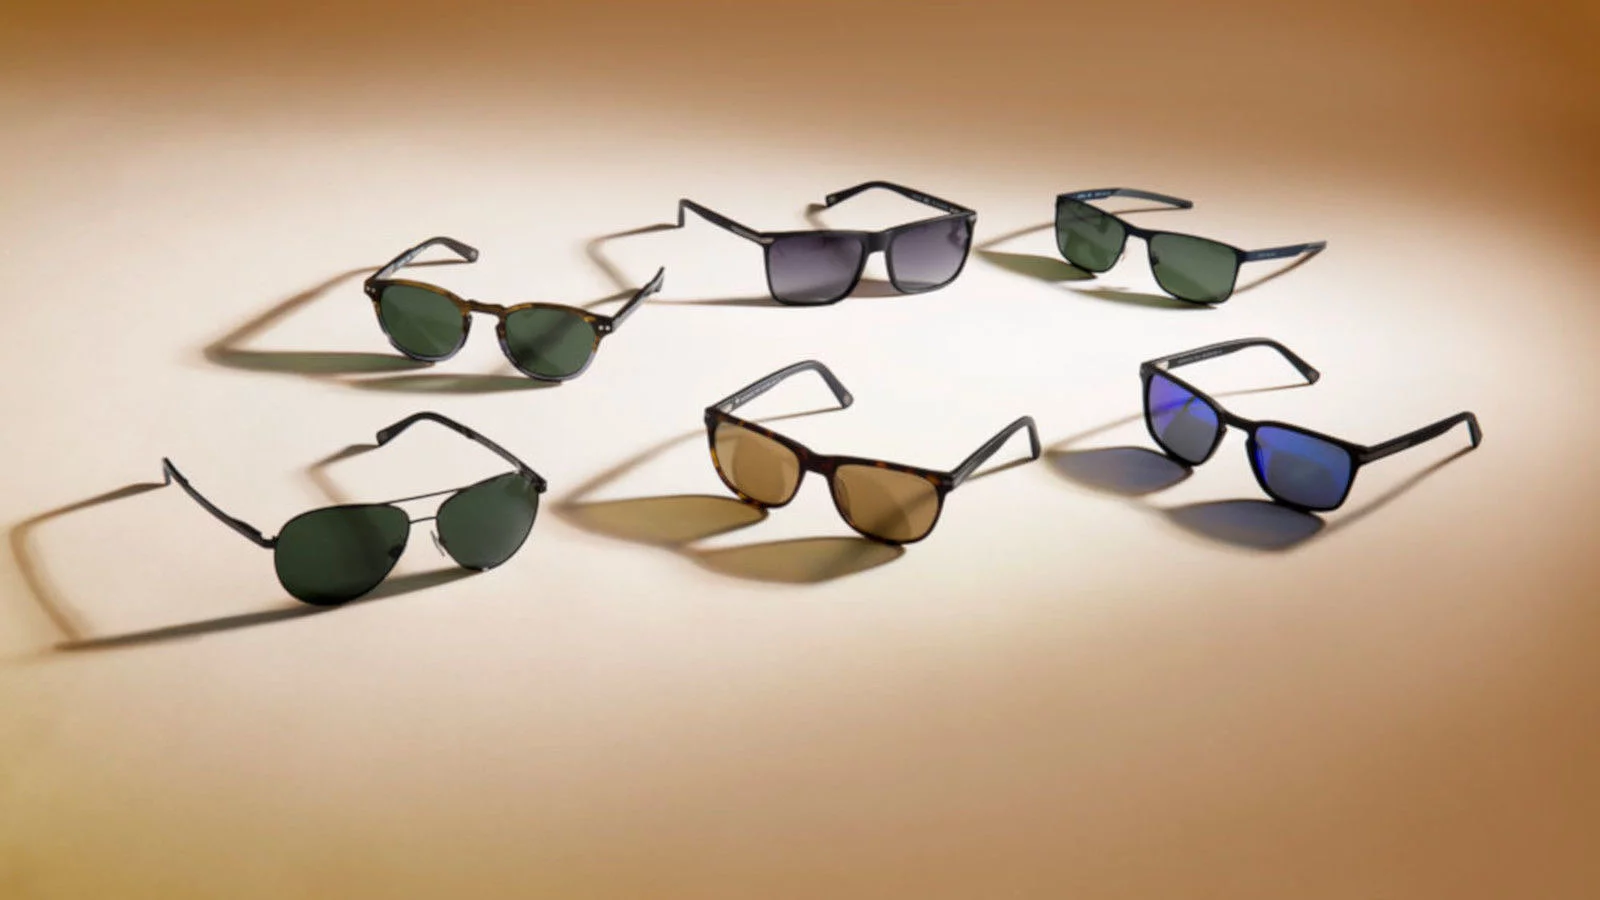 THE LIFESTYLE COLLECTION – SUNGLASSES